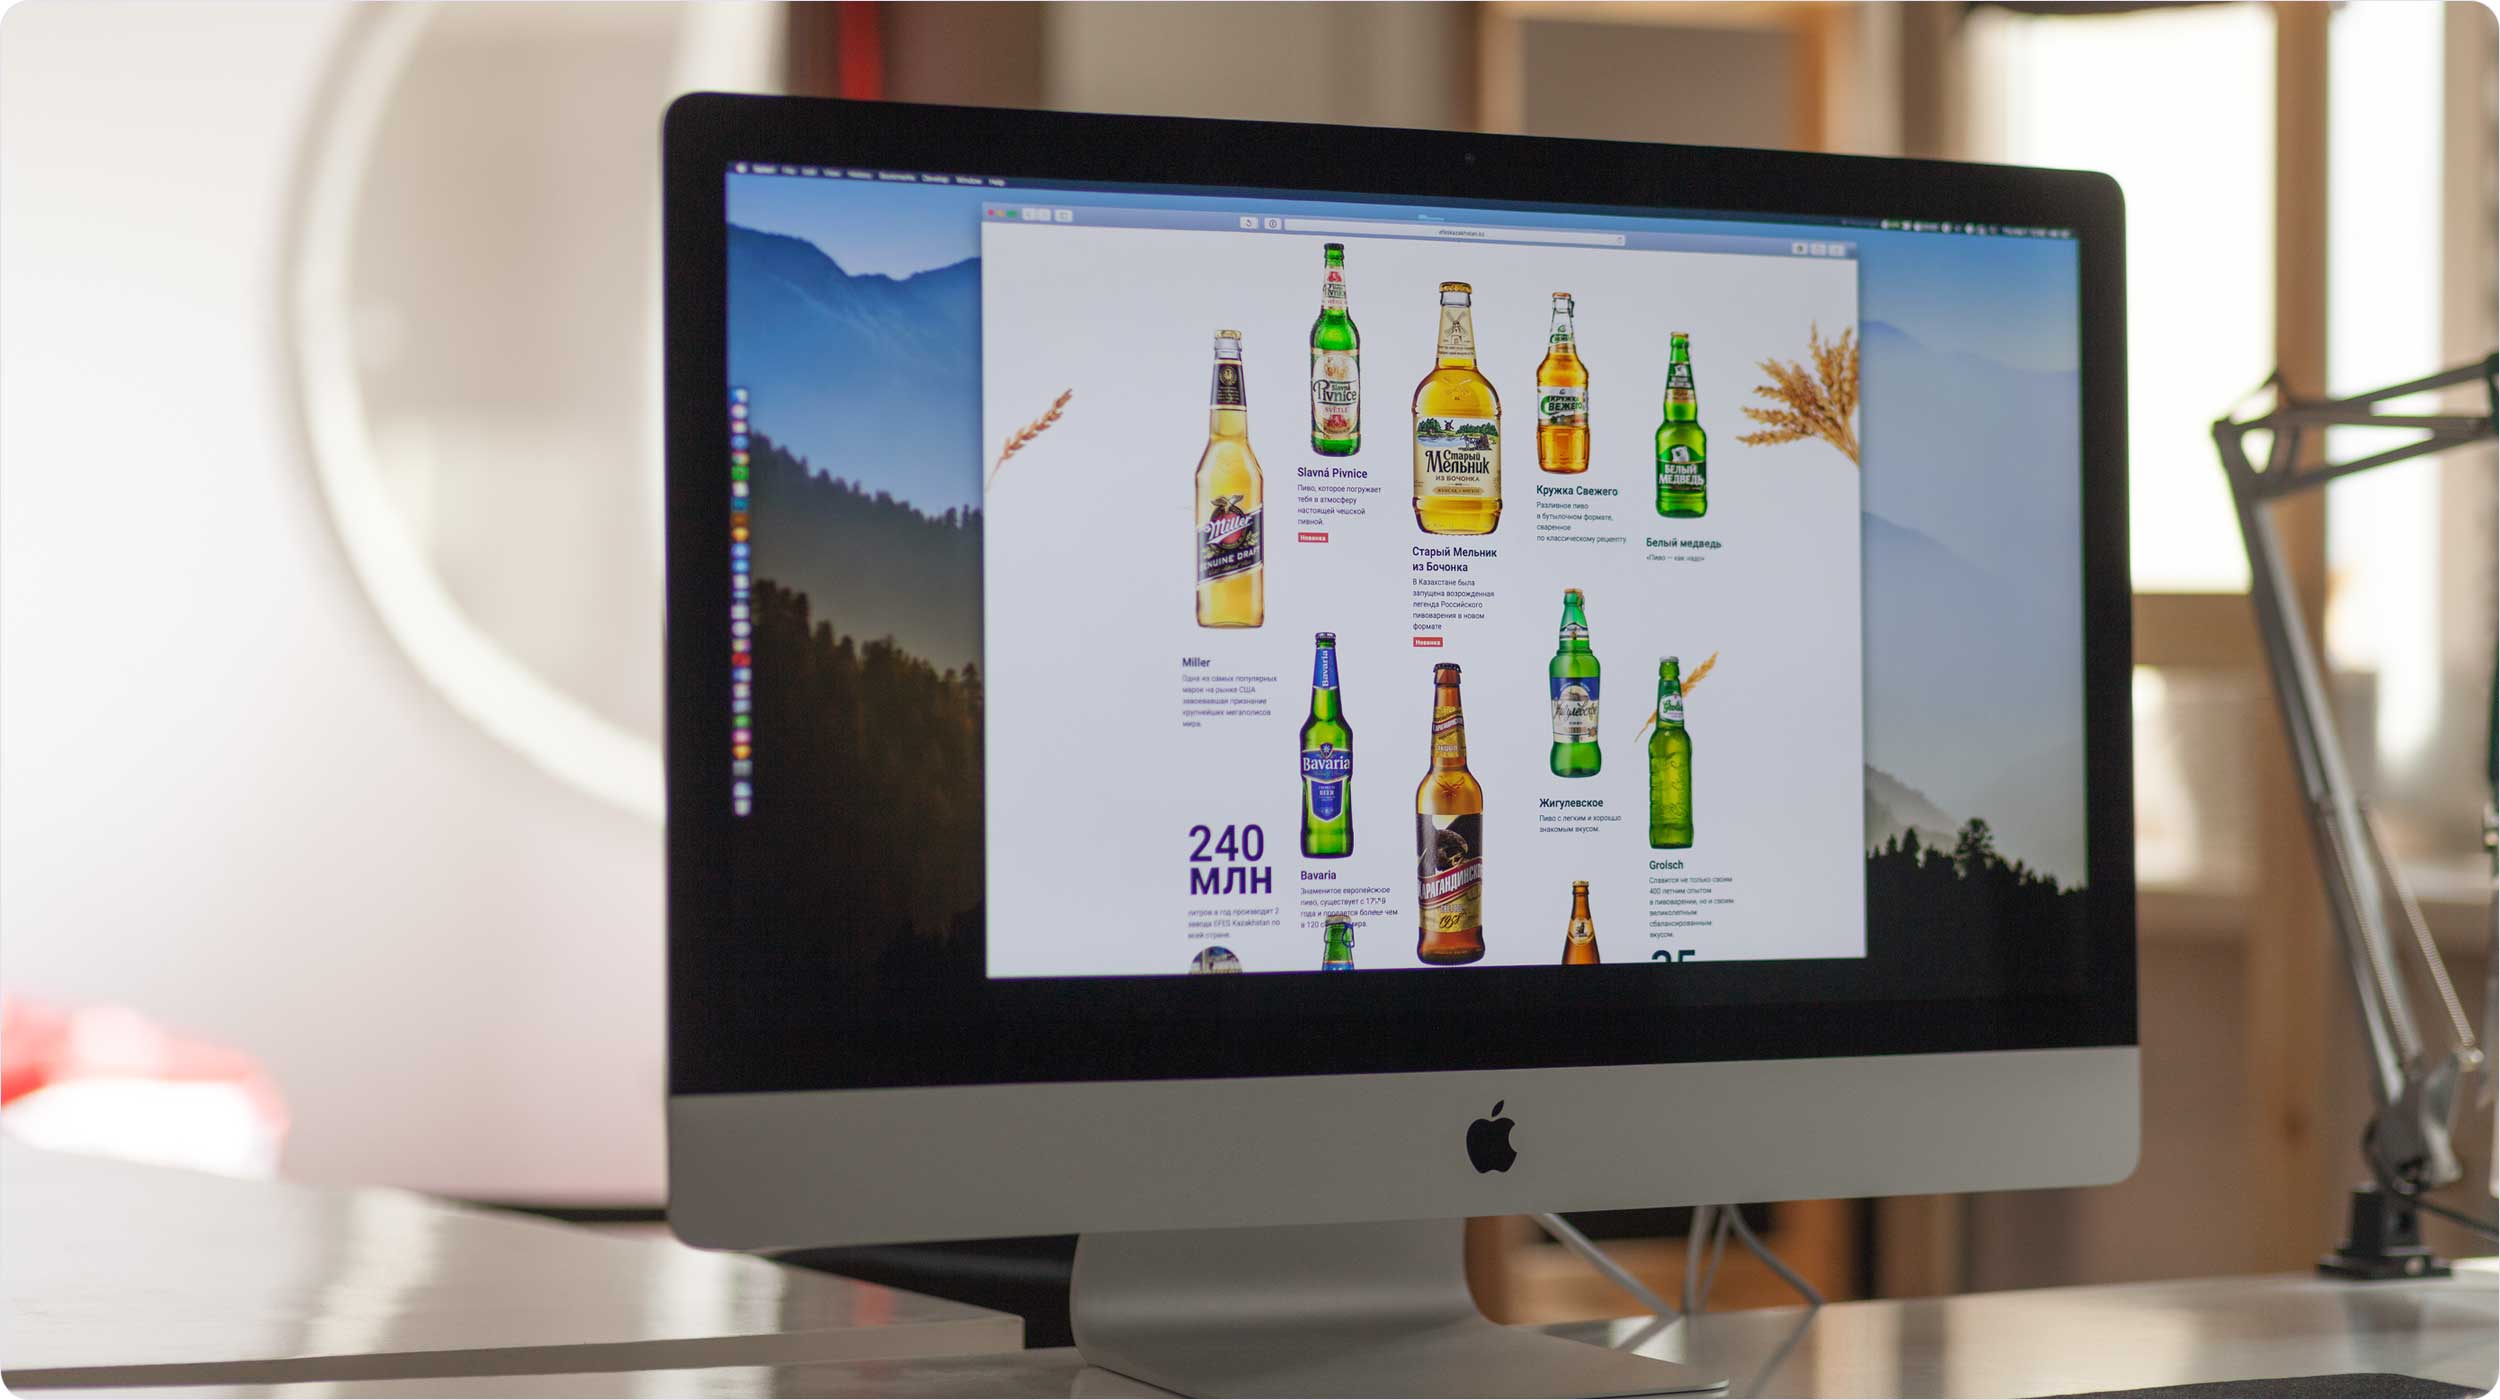 The "Efes Kazakhstan" website is on the computer screen.